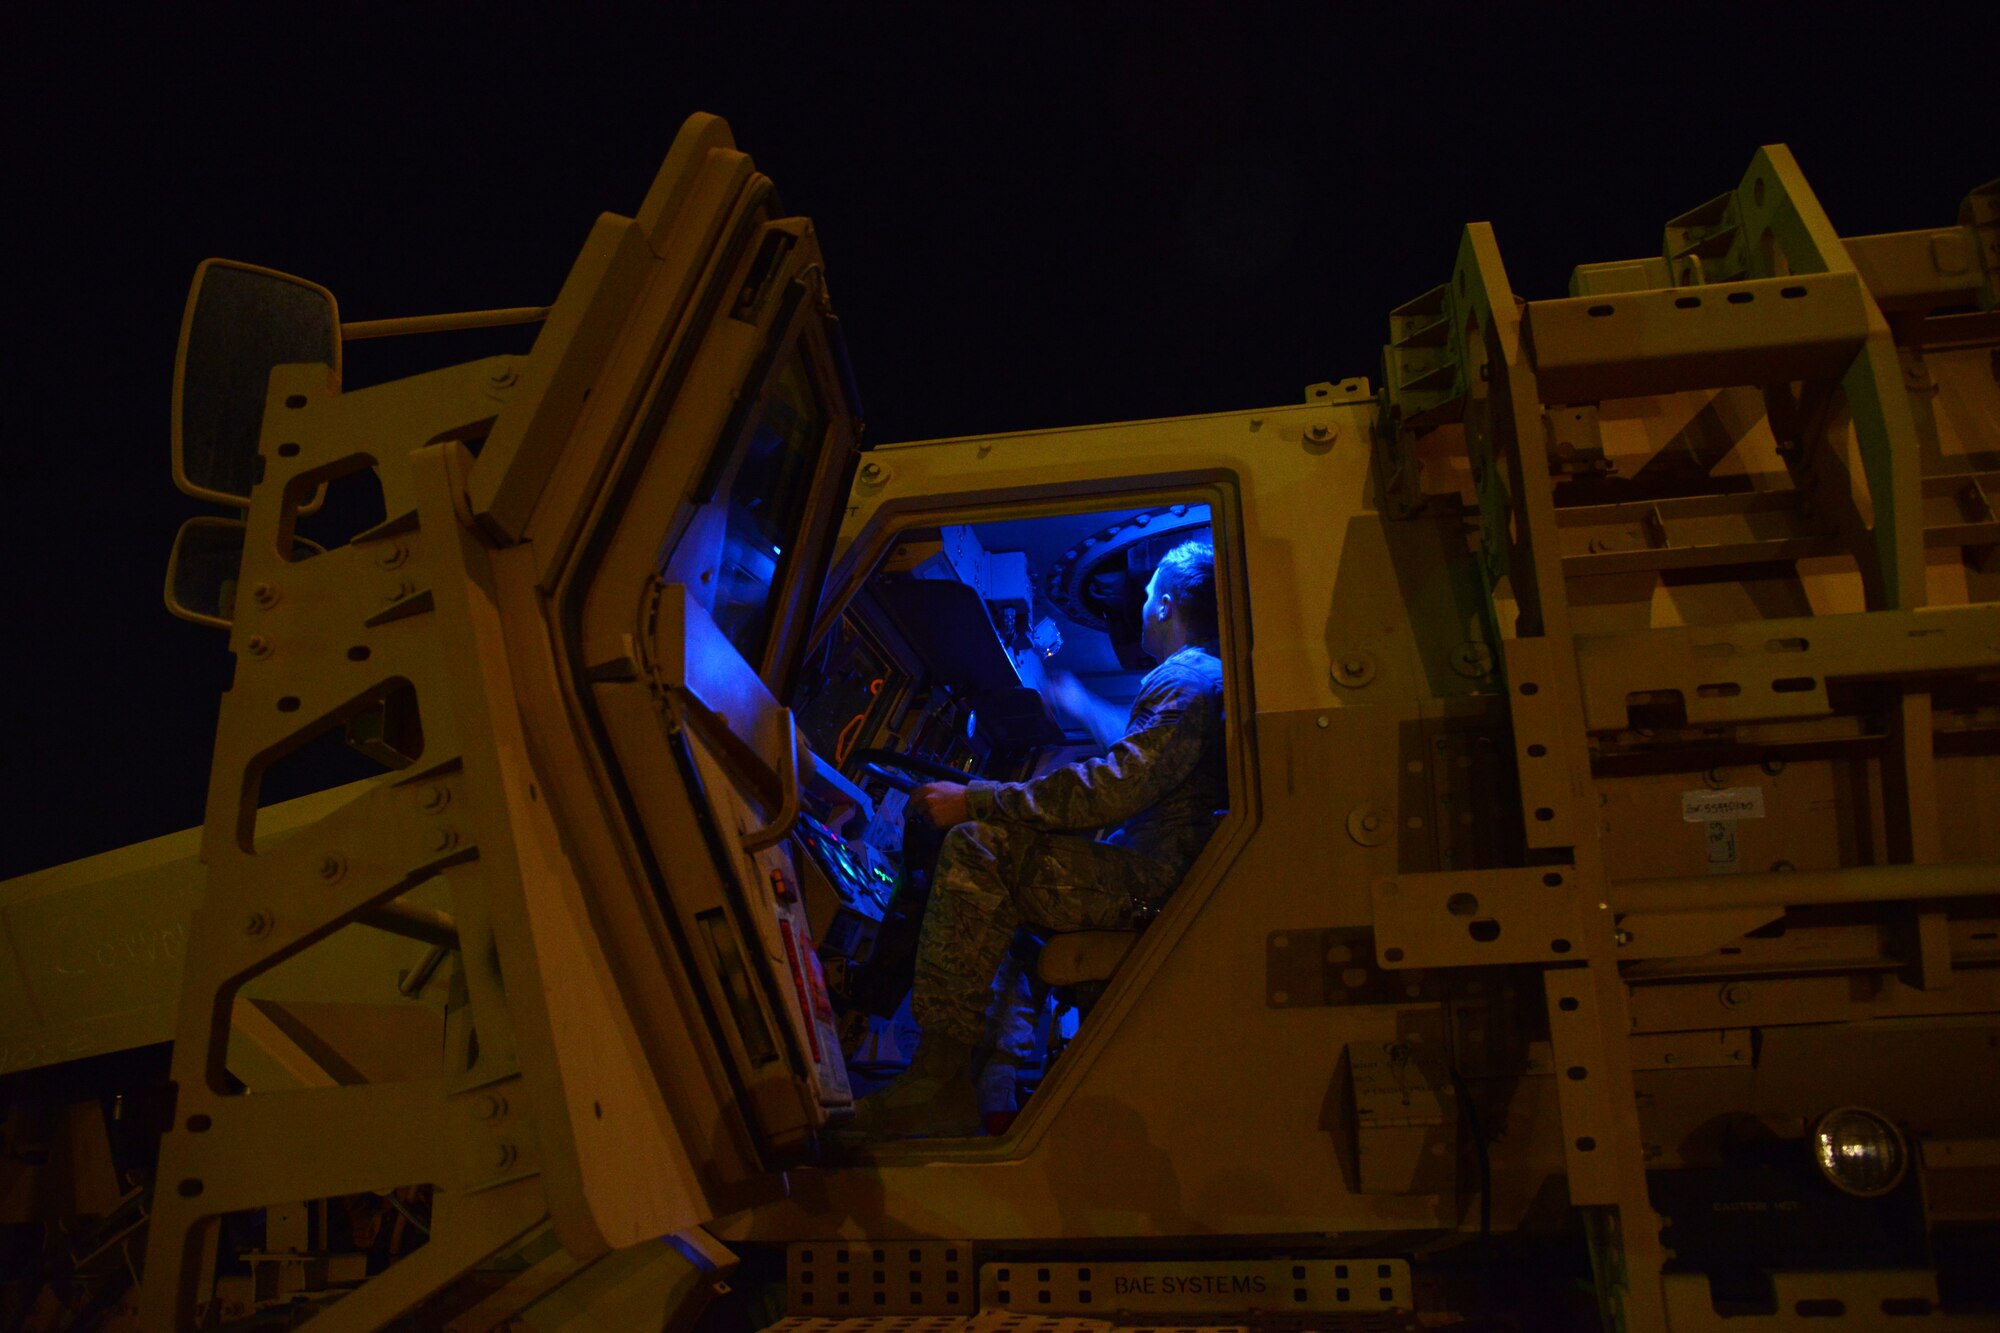 Airmen from the 386th Expeditionary Operations Group and the 386th Expeditionary Logistics Readiness Squadron, load two Mine Resistant Armored Personnel carriers on a C-17 Globemaster III bound for Erbil, Iraq, Dec. 30, 2014. The MRAPs are for the Iraqi Security Forces and Peshmerga to aid in the fight against Daish. (U.S. Air Force photo by Tech. Sgt. Jared Marquis)